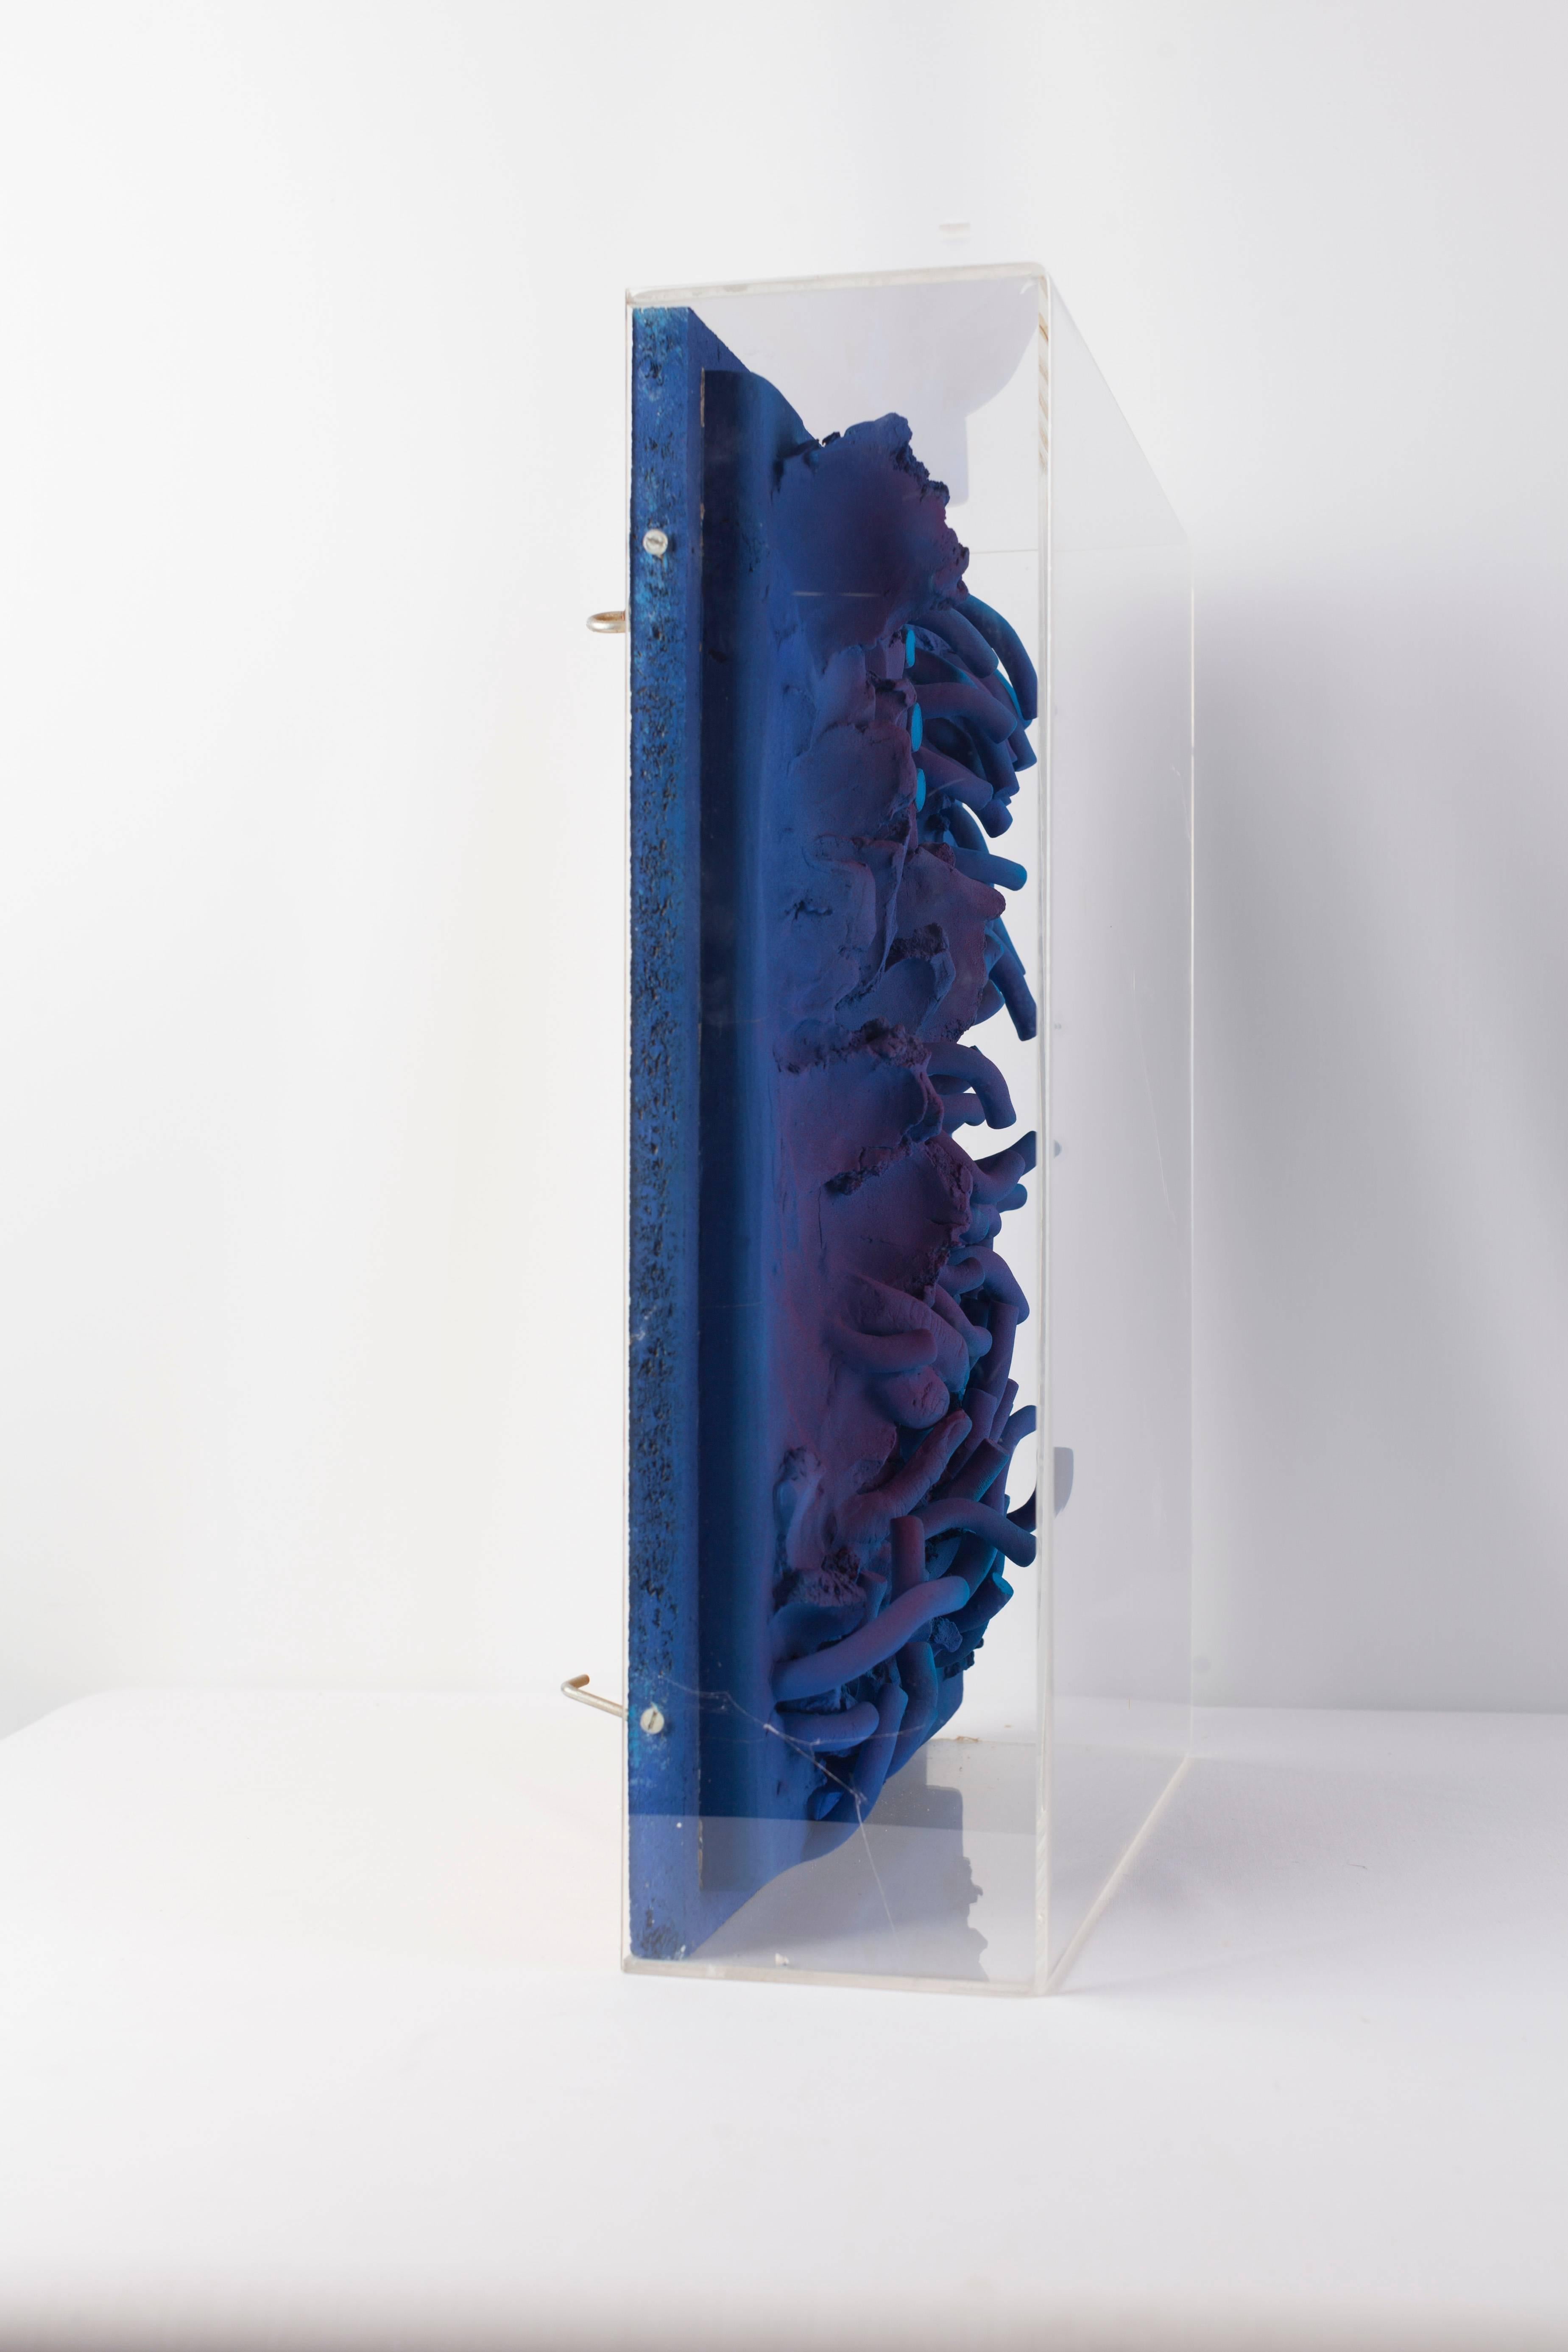 Organic Modern Wall Sculpture with Optical Art in Plexiglass created by César Bailleux For Sale